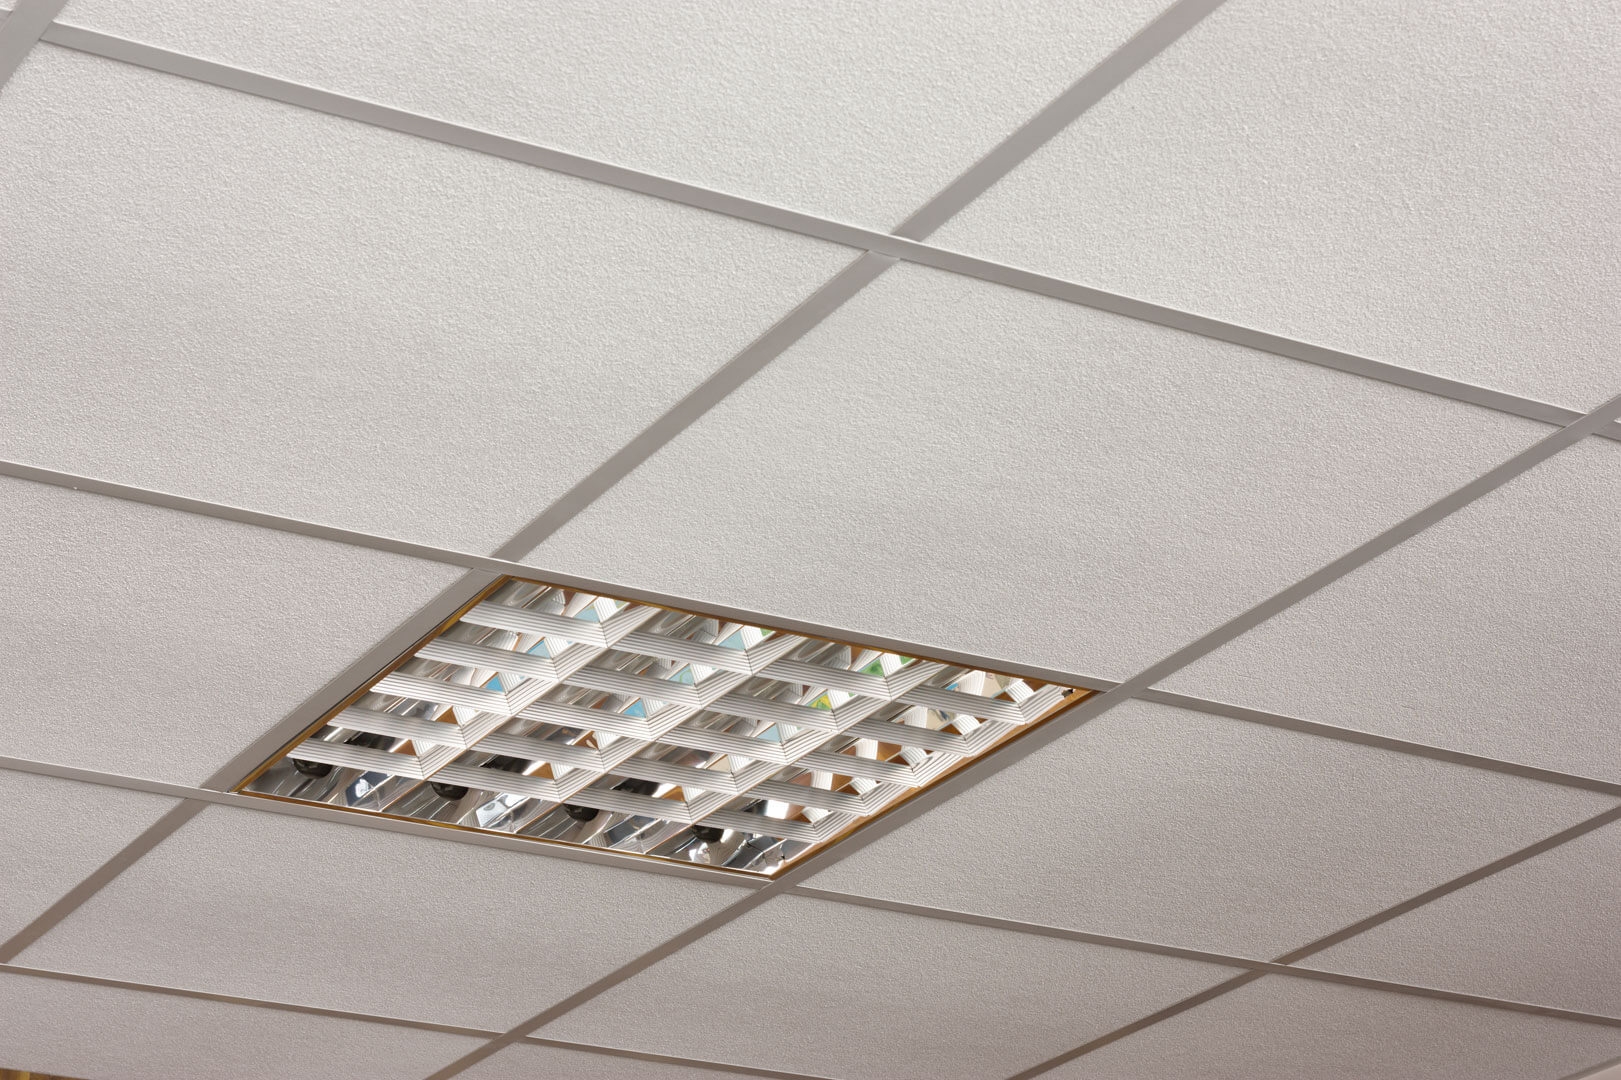 Insulated Ceiling Tiles Armstrong Insulated Ceiling Tiles Armstrong ceiling tiles lights accessories a leading uk supplier of 1621 X 1080